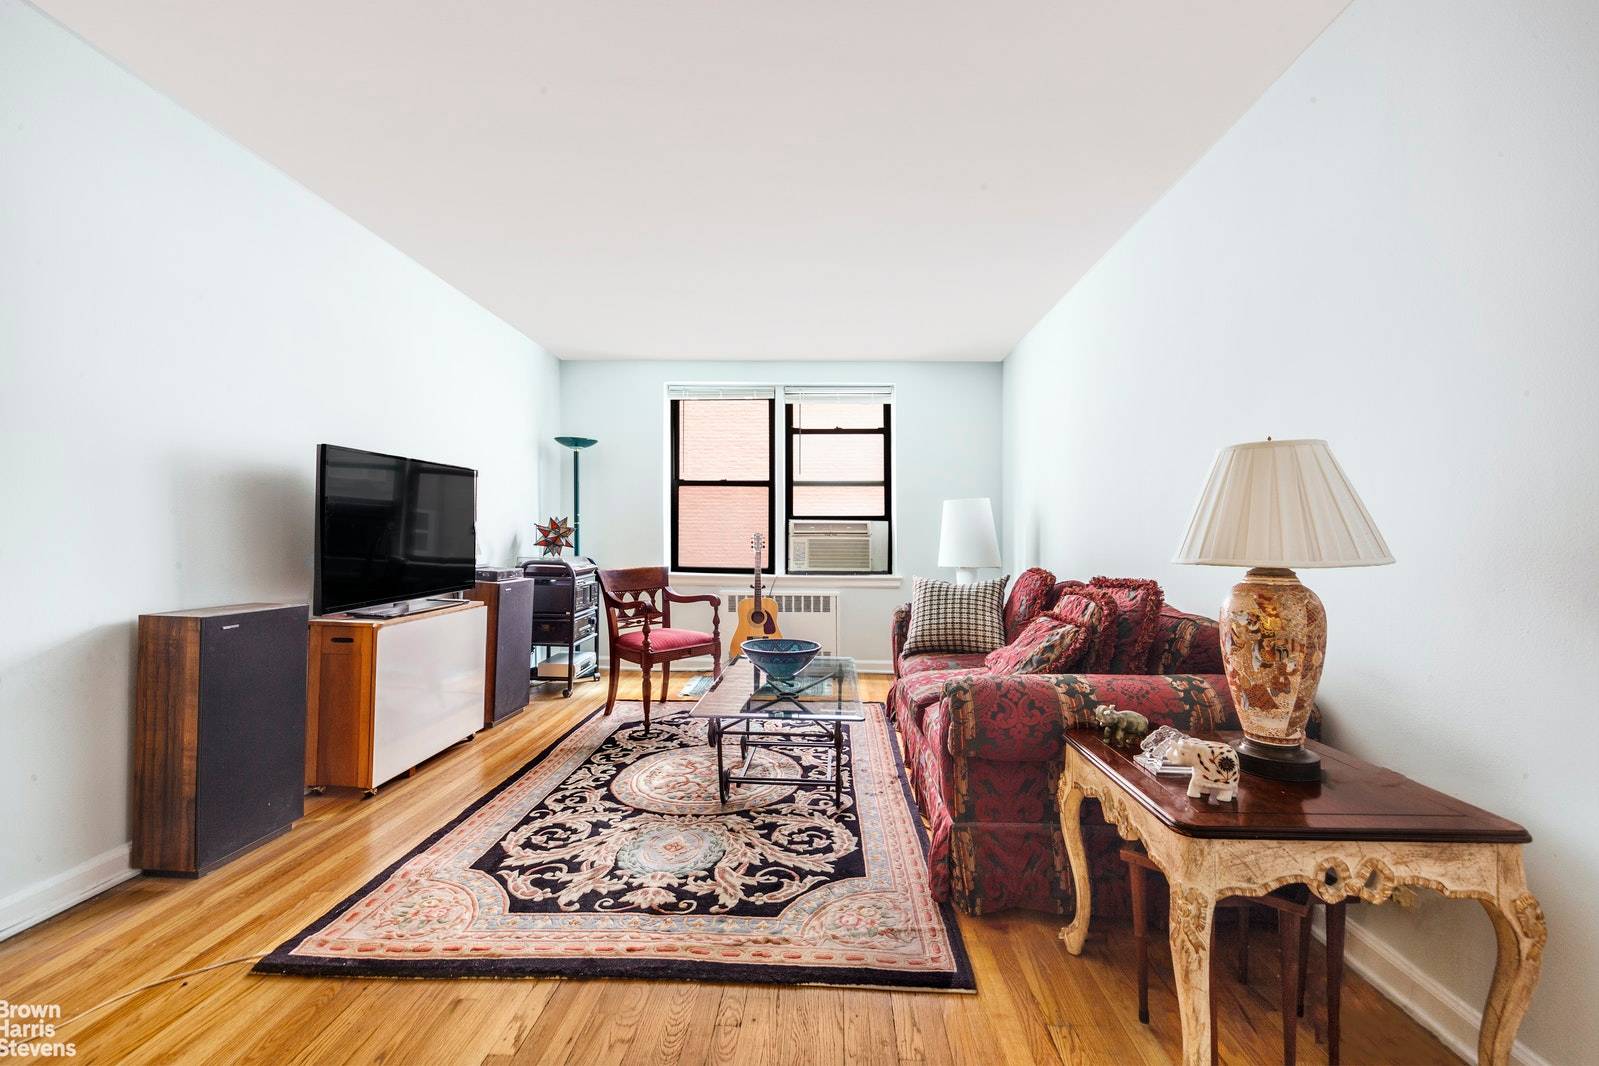 This beautiful one bedroom one bath home is located at 54 East 8th Street, a well maintained co op building, nestled in the heart of Greenwich Village.